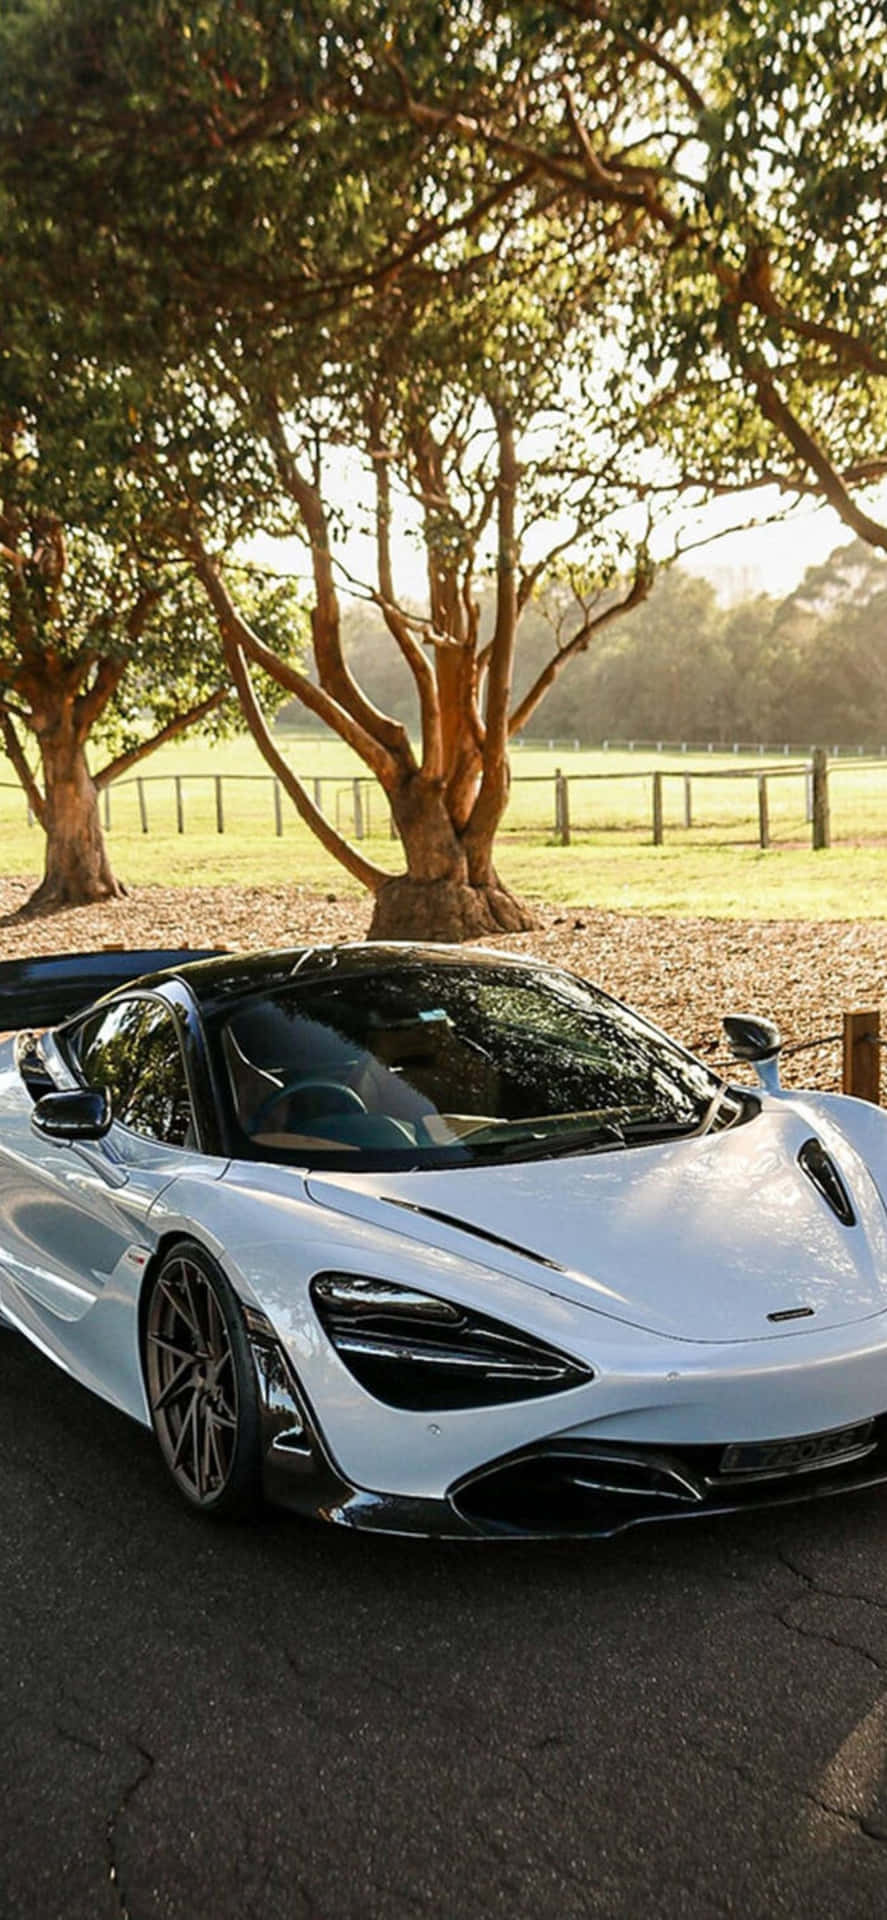 The sleek, modern iPhone Xs Max stands out next to the classic, powerful McLaren 720s